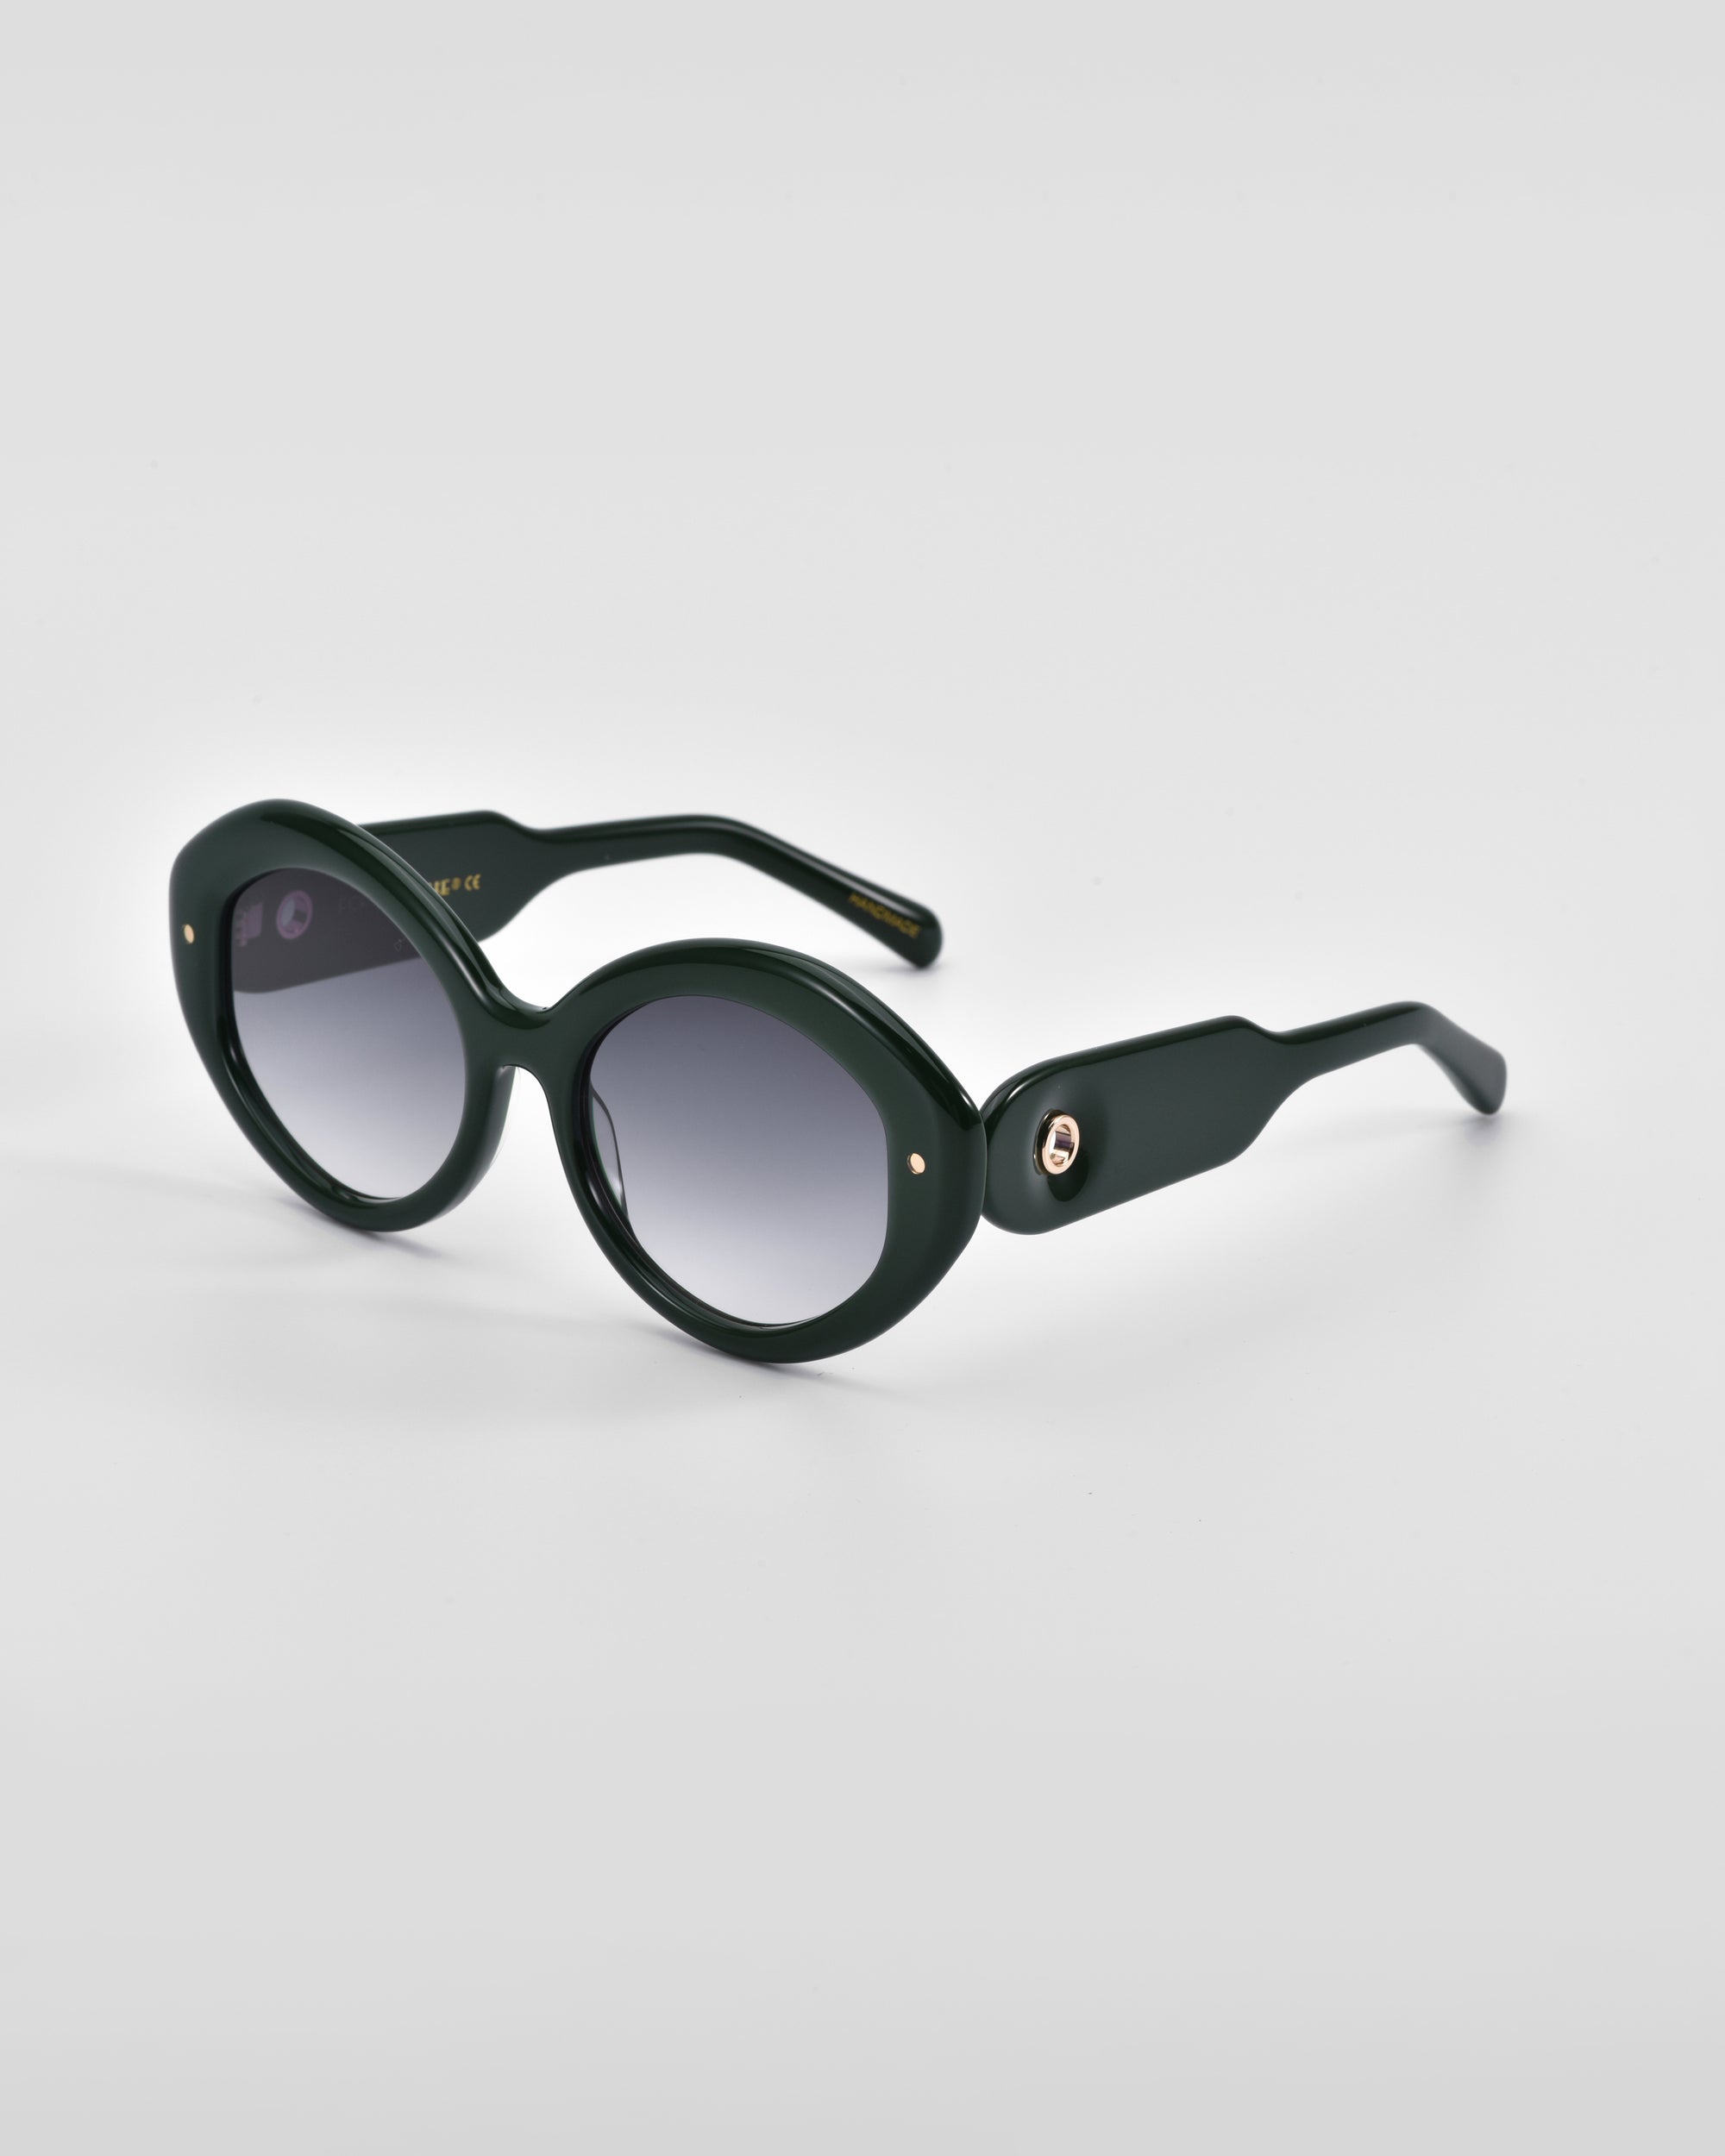 A pair of dark green, oval-shaped Helios sunglasses from For Art&#39;s Sake® with thick frames and gradient lenses. The arms, also thick, feature a small, circular metallic accent near the hinges. This piece of luxury eyewear stands out against the plain white background.